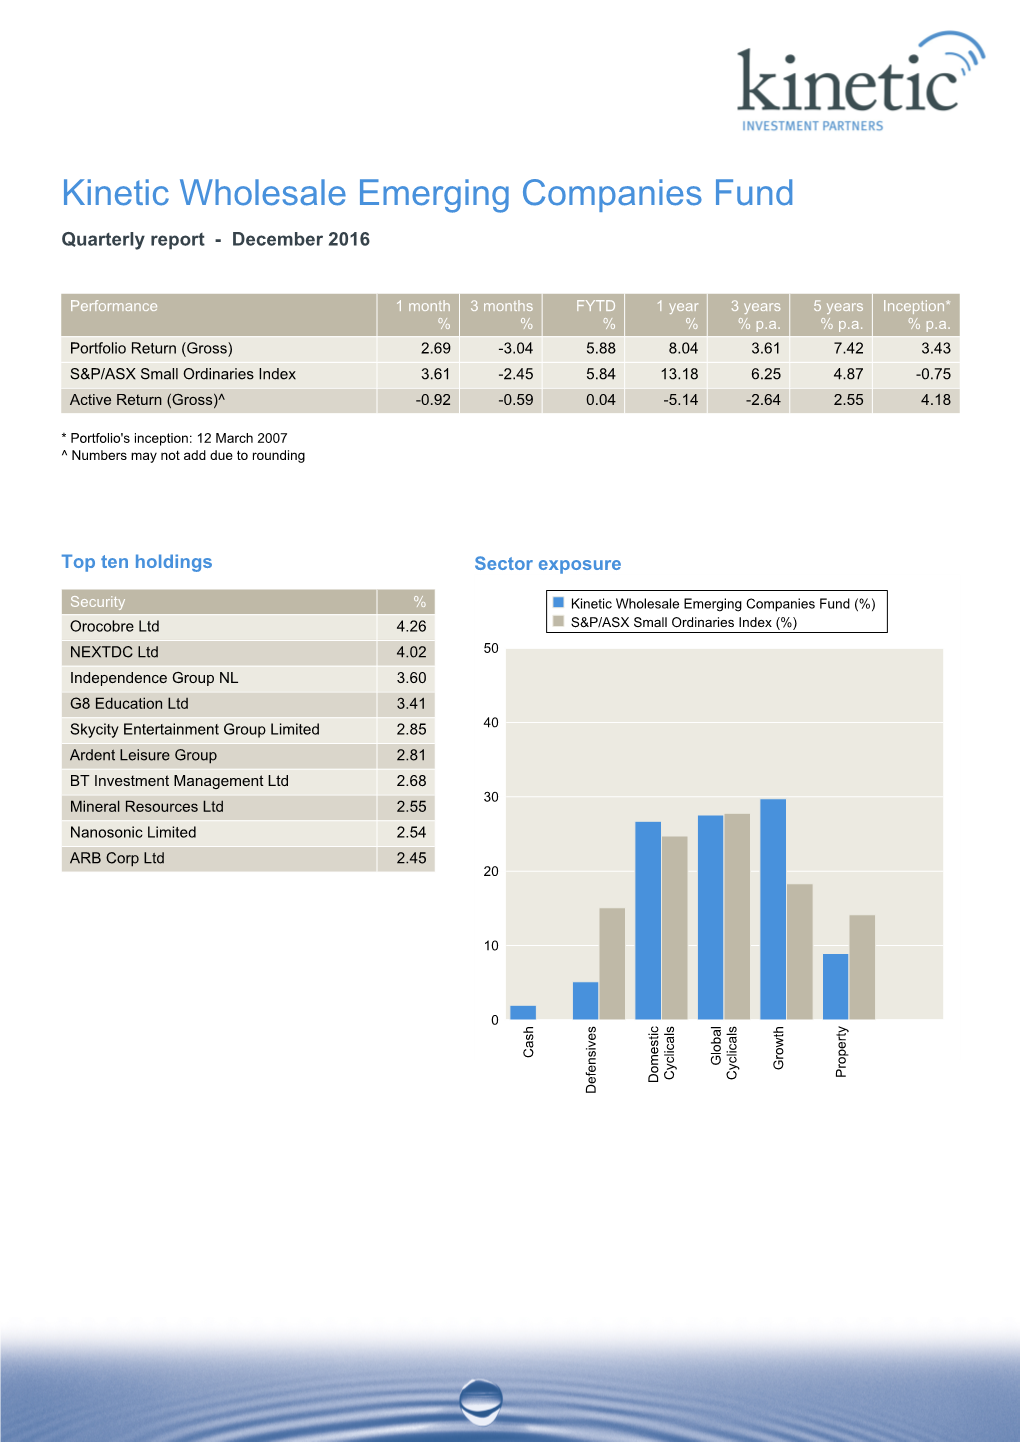 Kinetic Wholesale Emerging Companies Fund Quarterly Report - December 2016